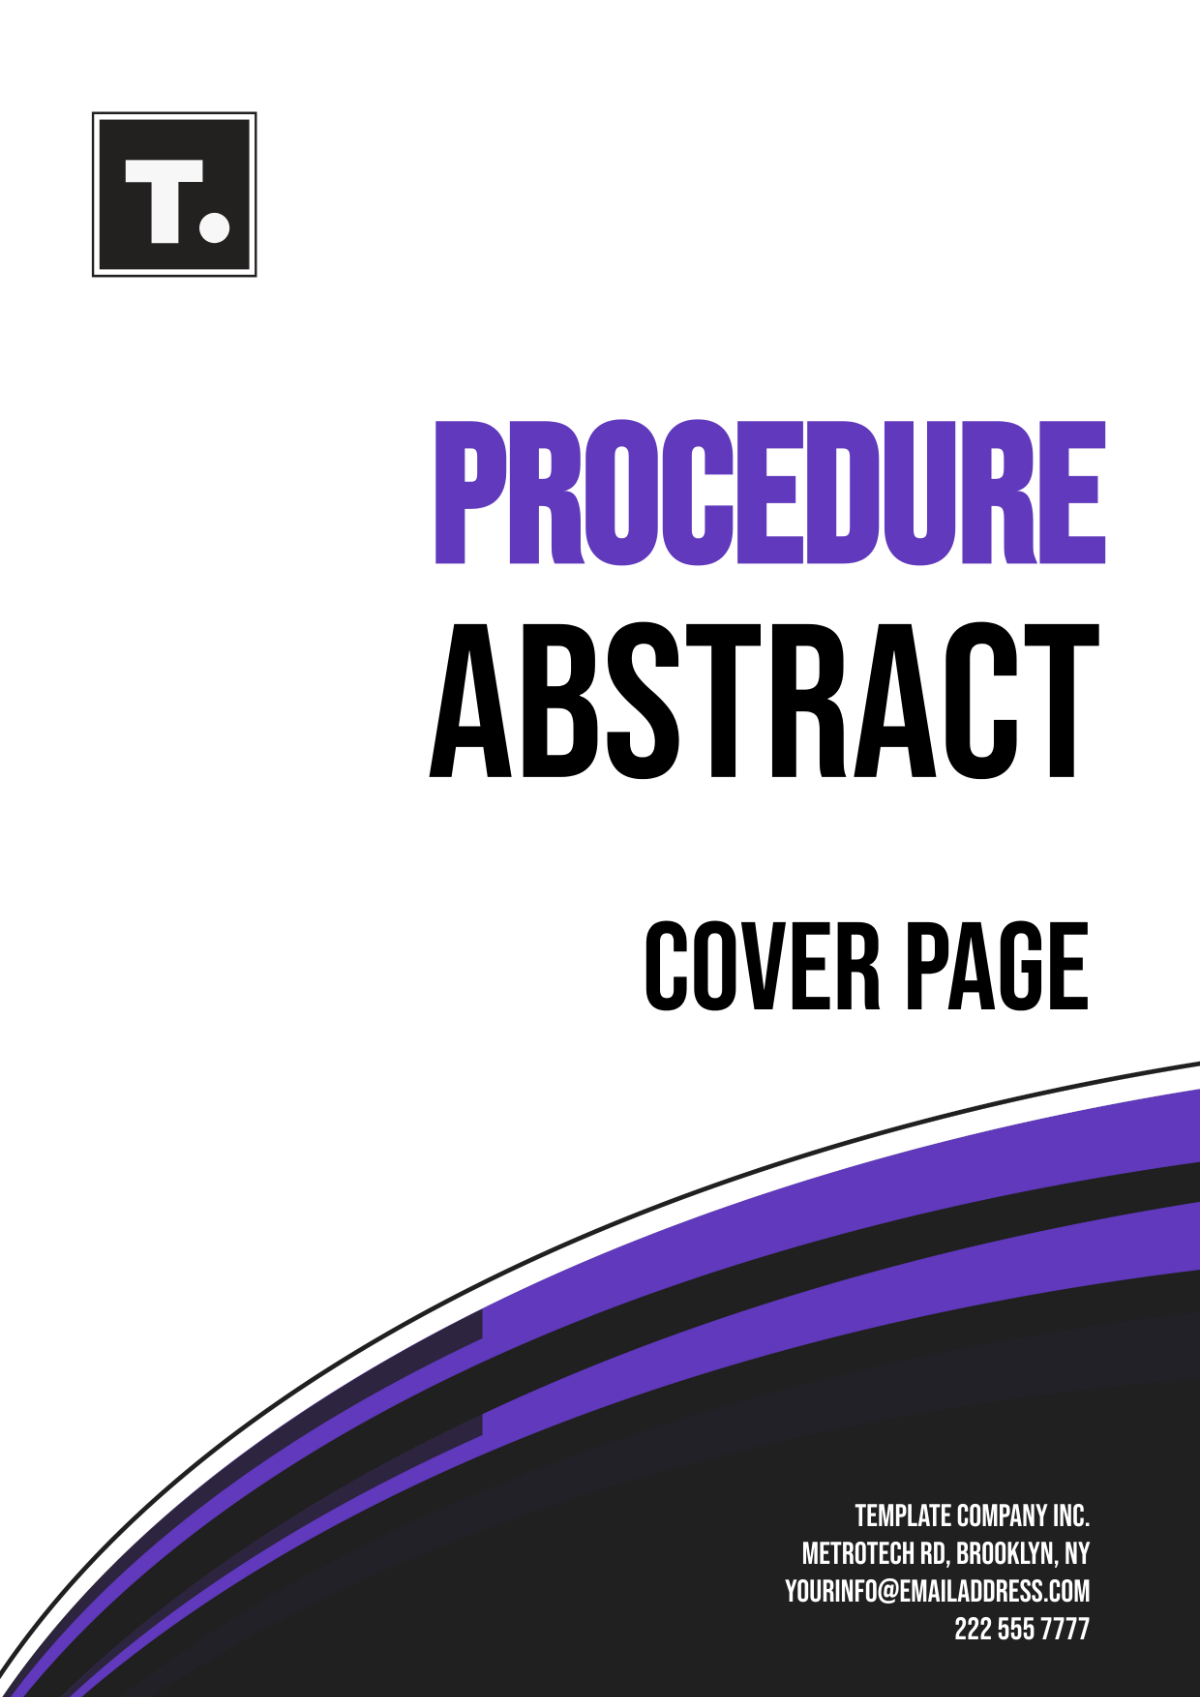 Procedure Abstract Cover Page